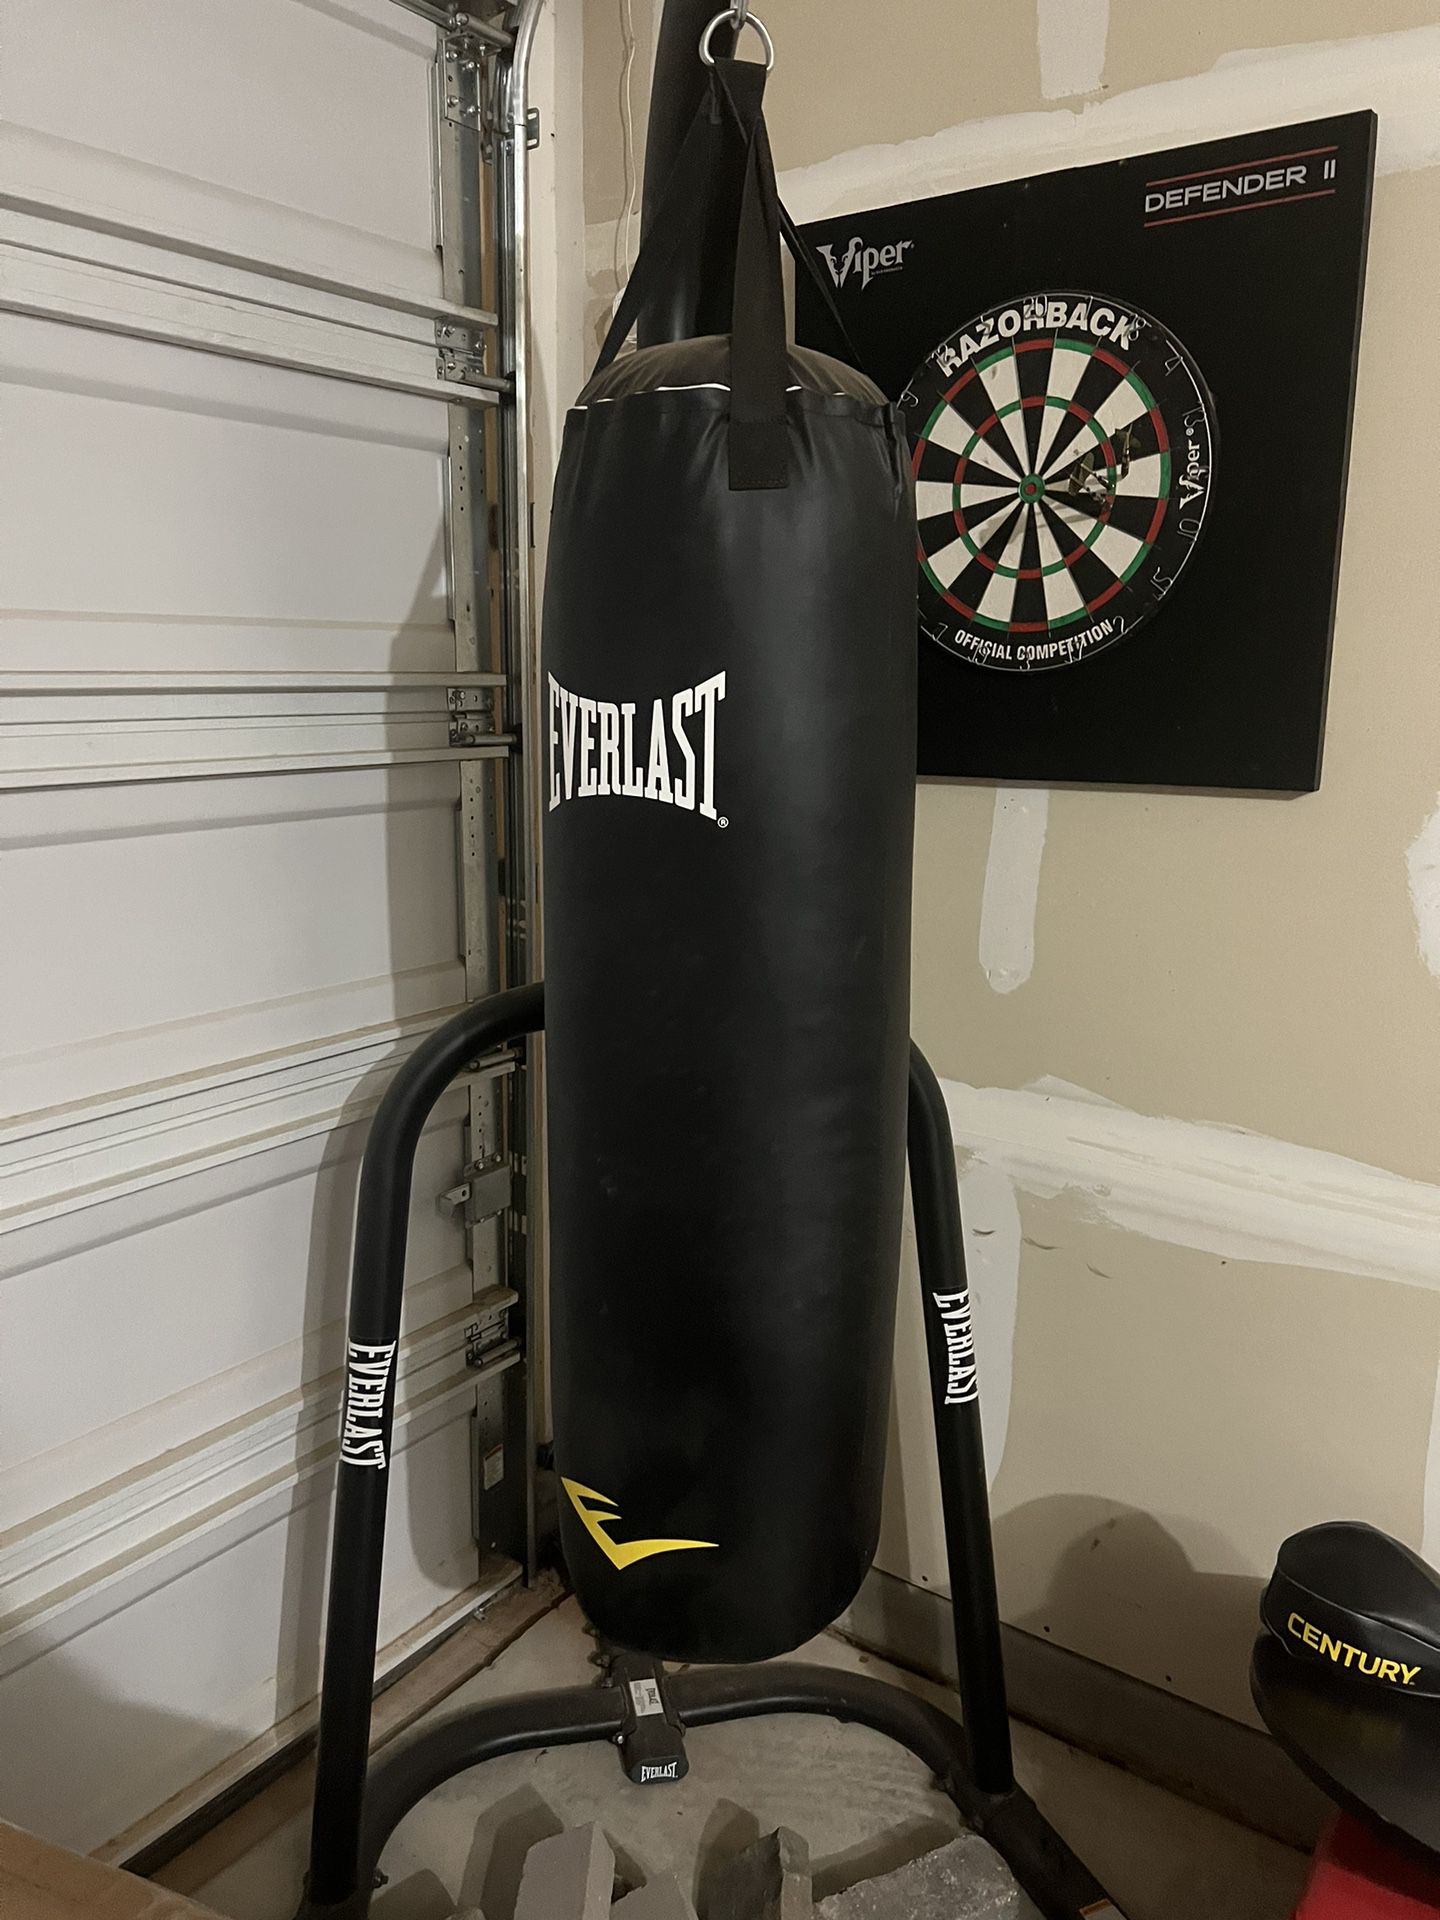 Everlast Punching Bag for Sale in Rio Rancho, NM - OfferUp